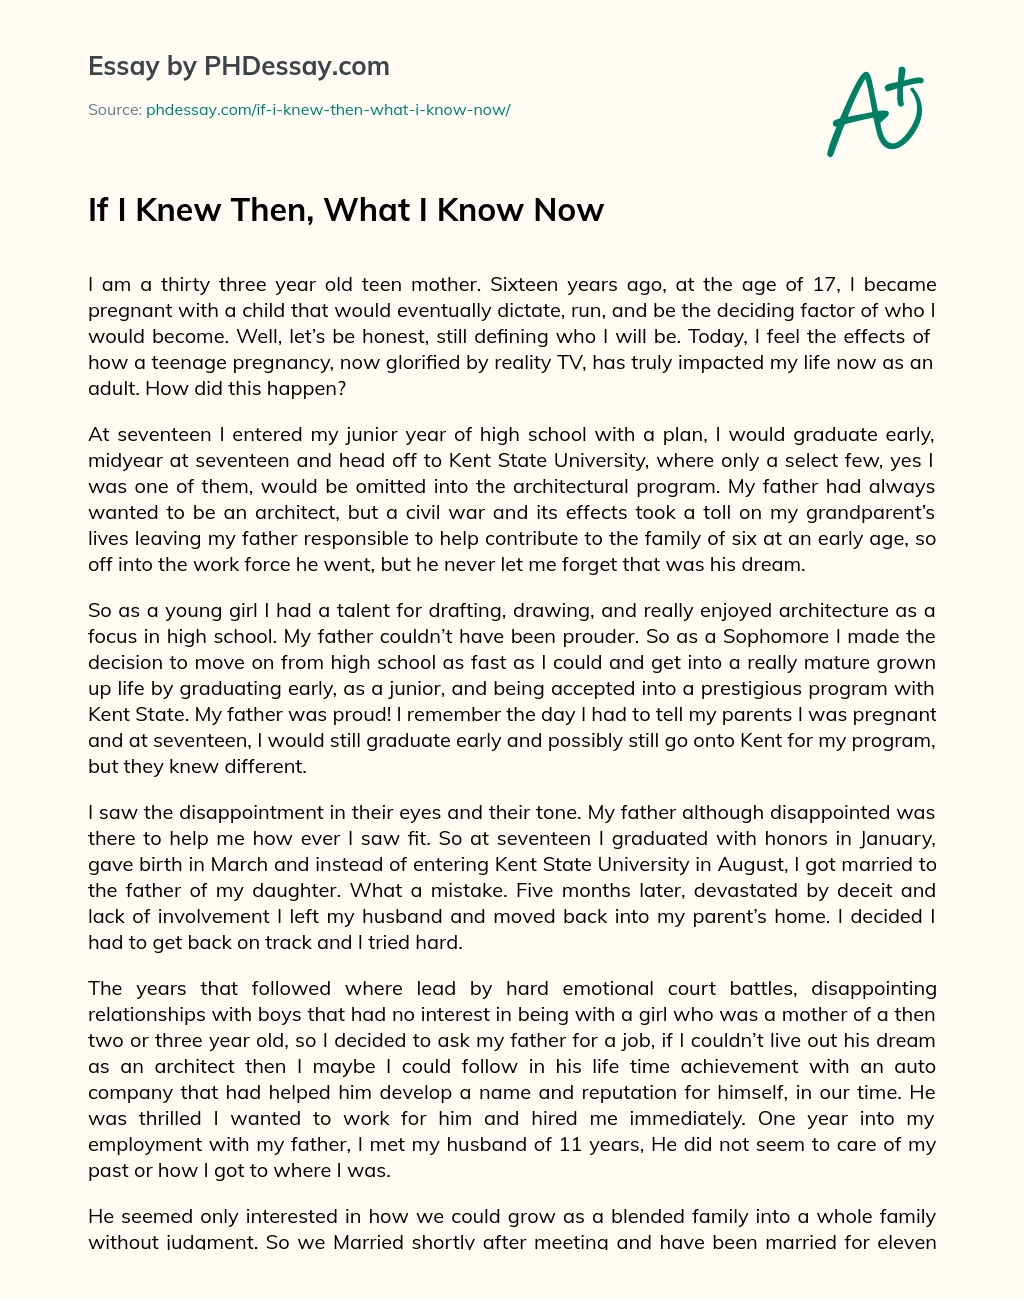 If I Knew Then, What I Know Now essay